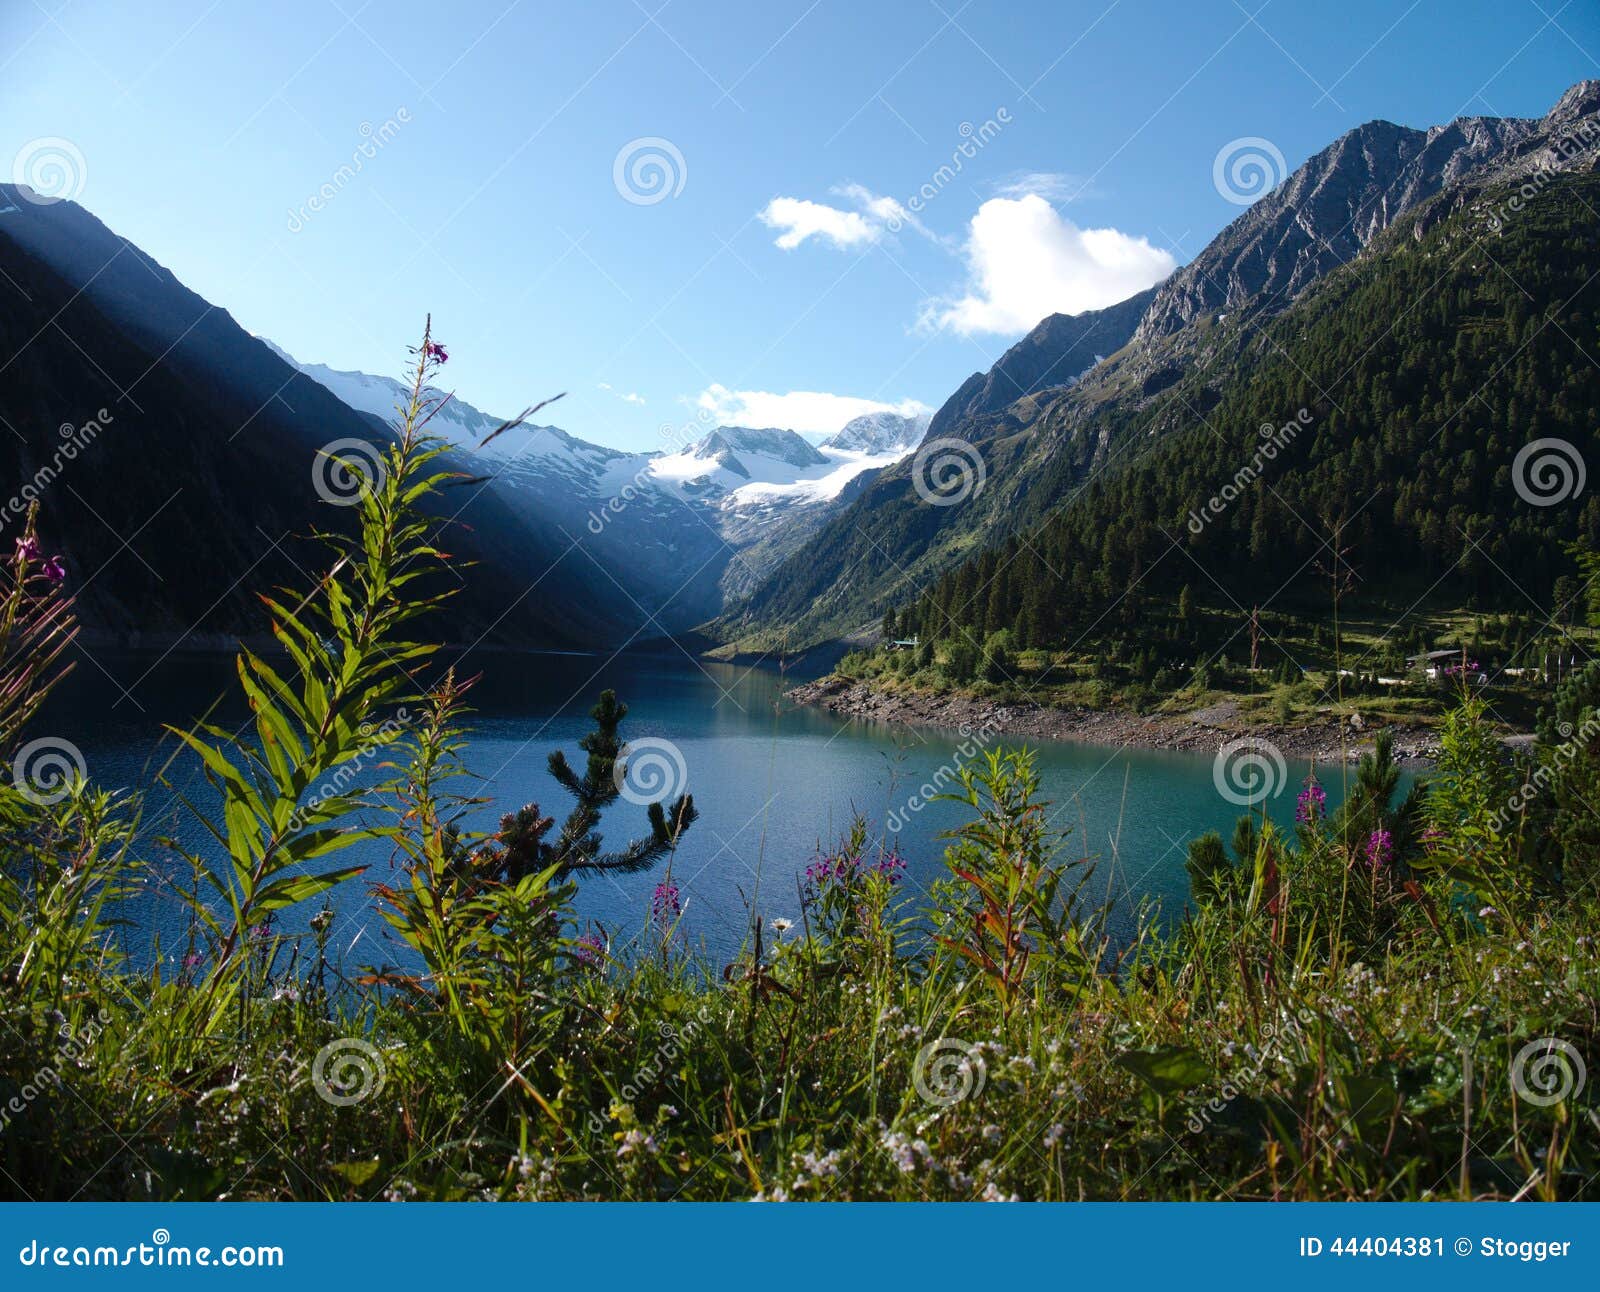 landscape with lake, mountains and blue sky